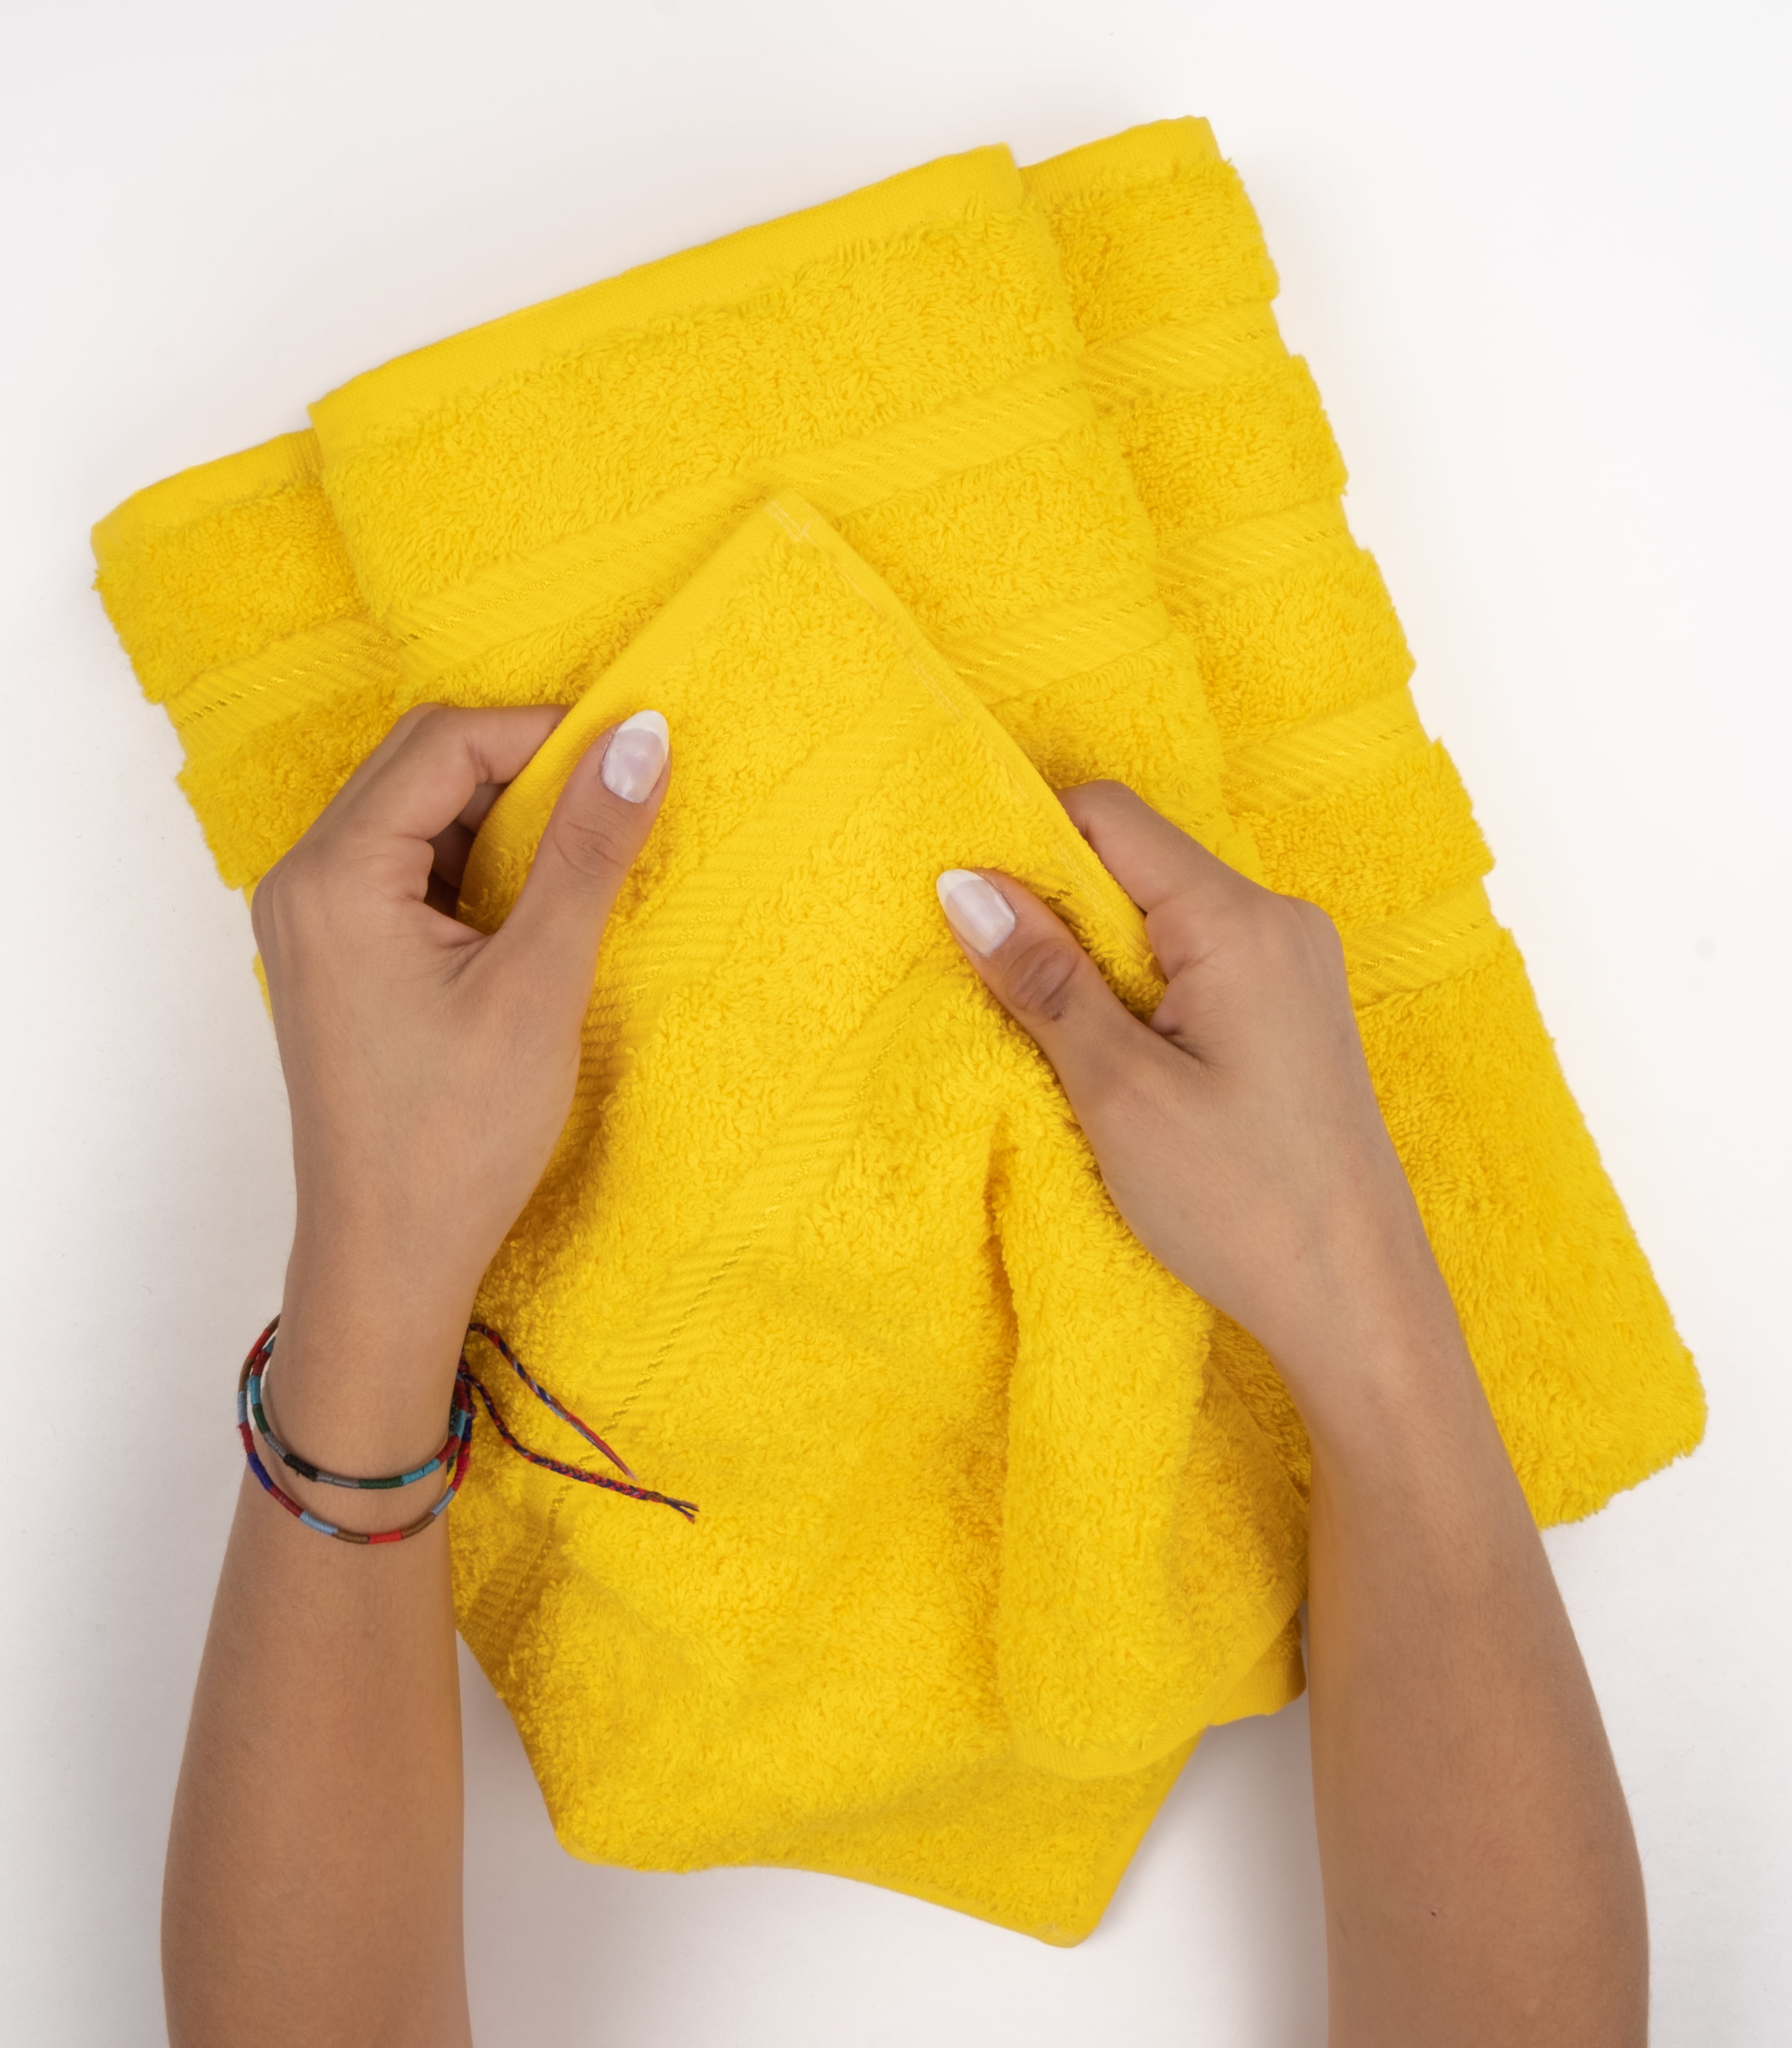 American Soft Linen American Soft Linen Washcloth Set 100% Turkish Cotton 4  Piece Face Hand Towels for Bathroom and Kitchen - Lemon Yellow  Edis4WCSarE73 - The Home Depot